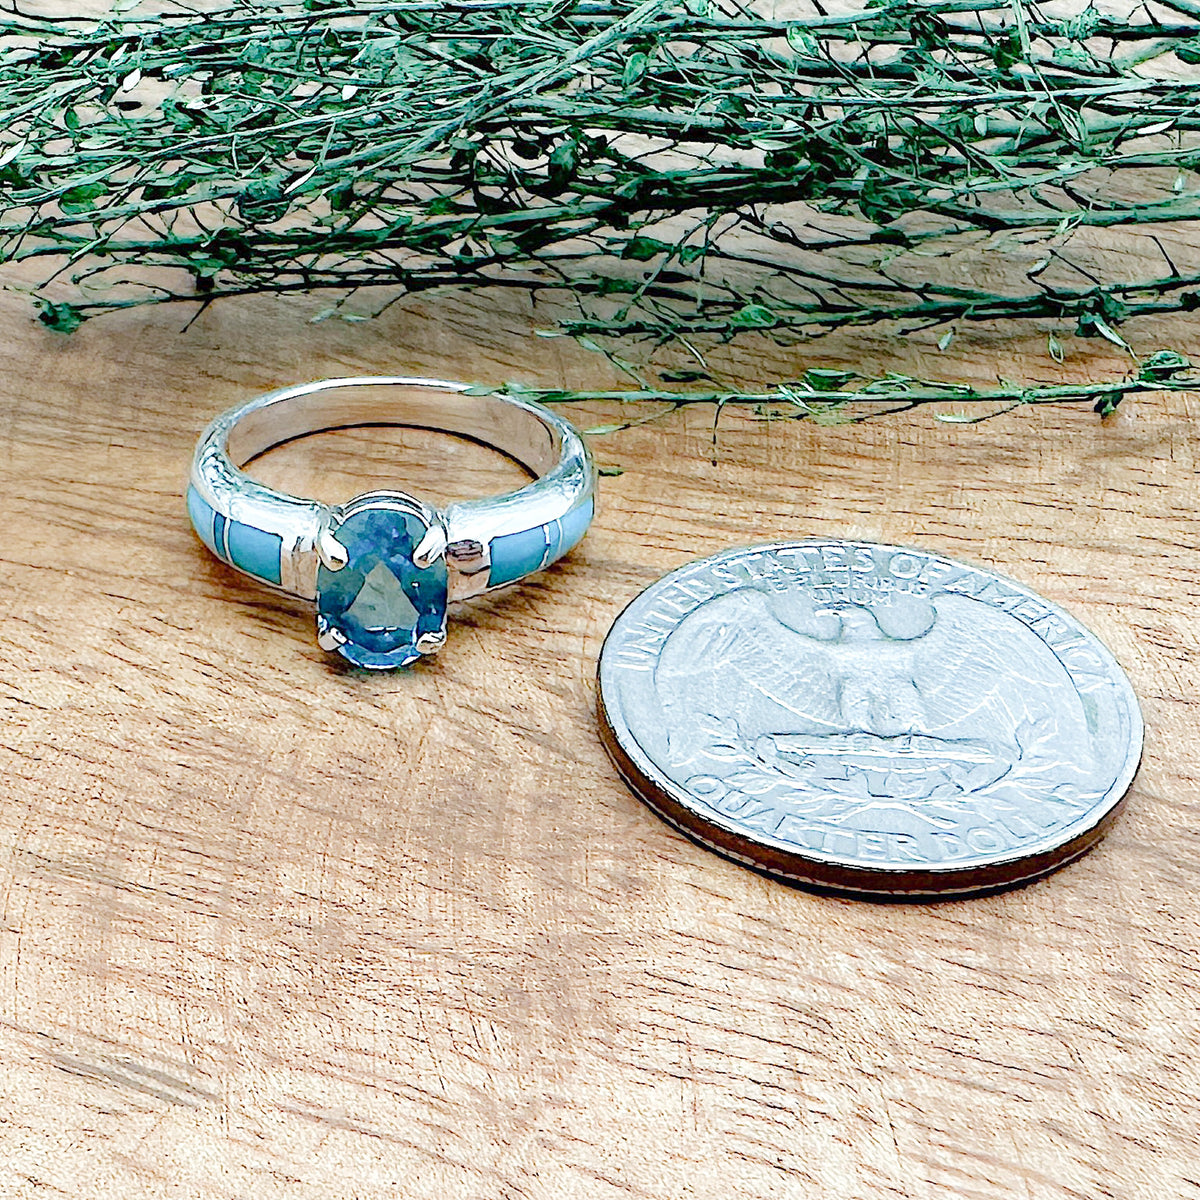 Size comparison of a US Quarter coin and a handmade sterling silver ring that has 6 hand cut stones with Sleeping Beauty Turquoise and a London Blue Topaz on top that is a part of the David Rosales collection.